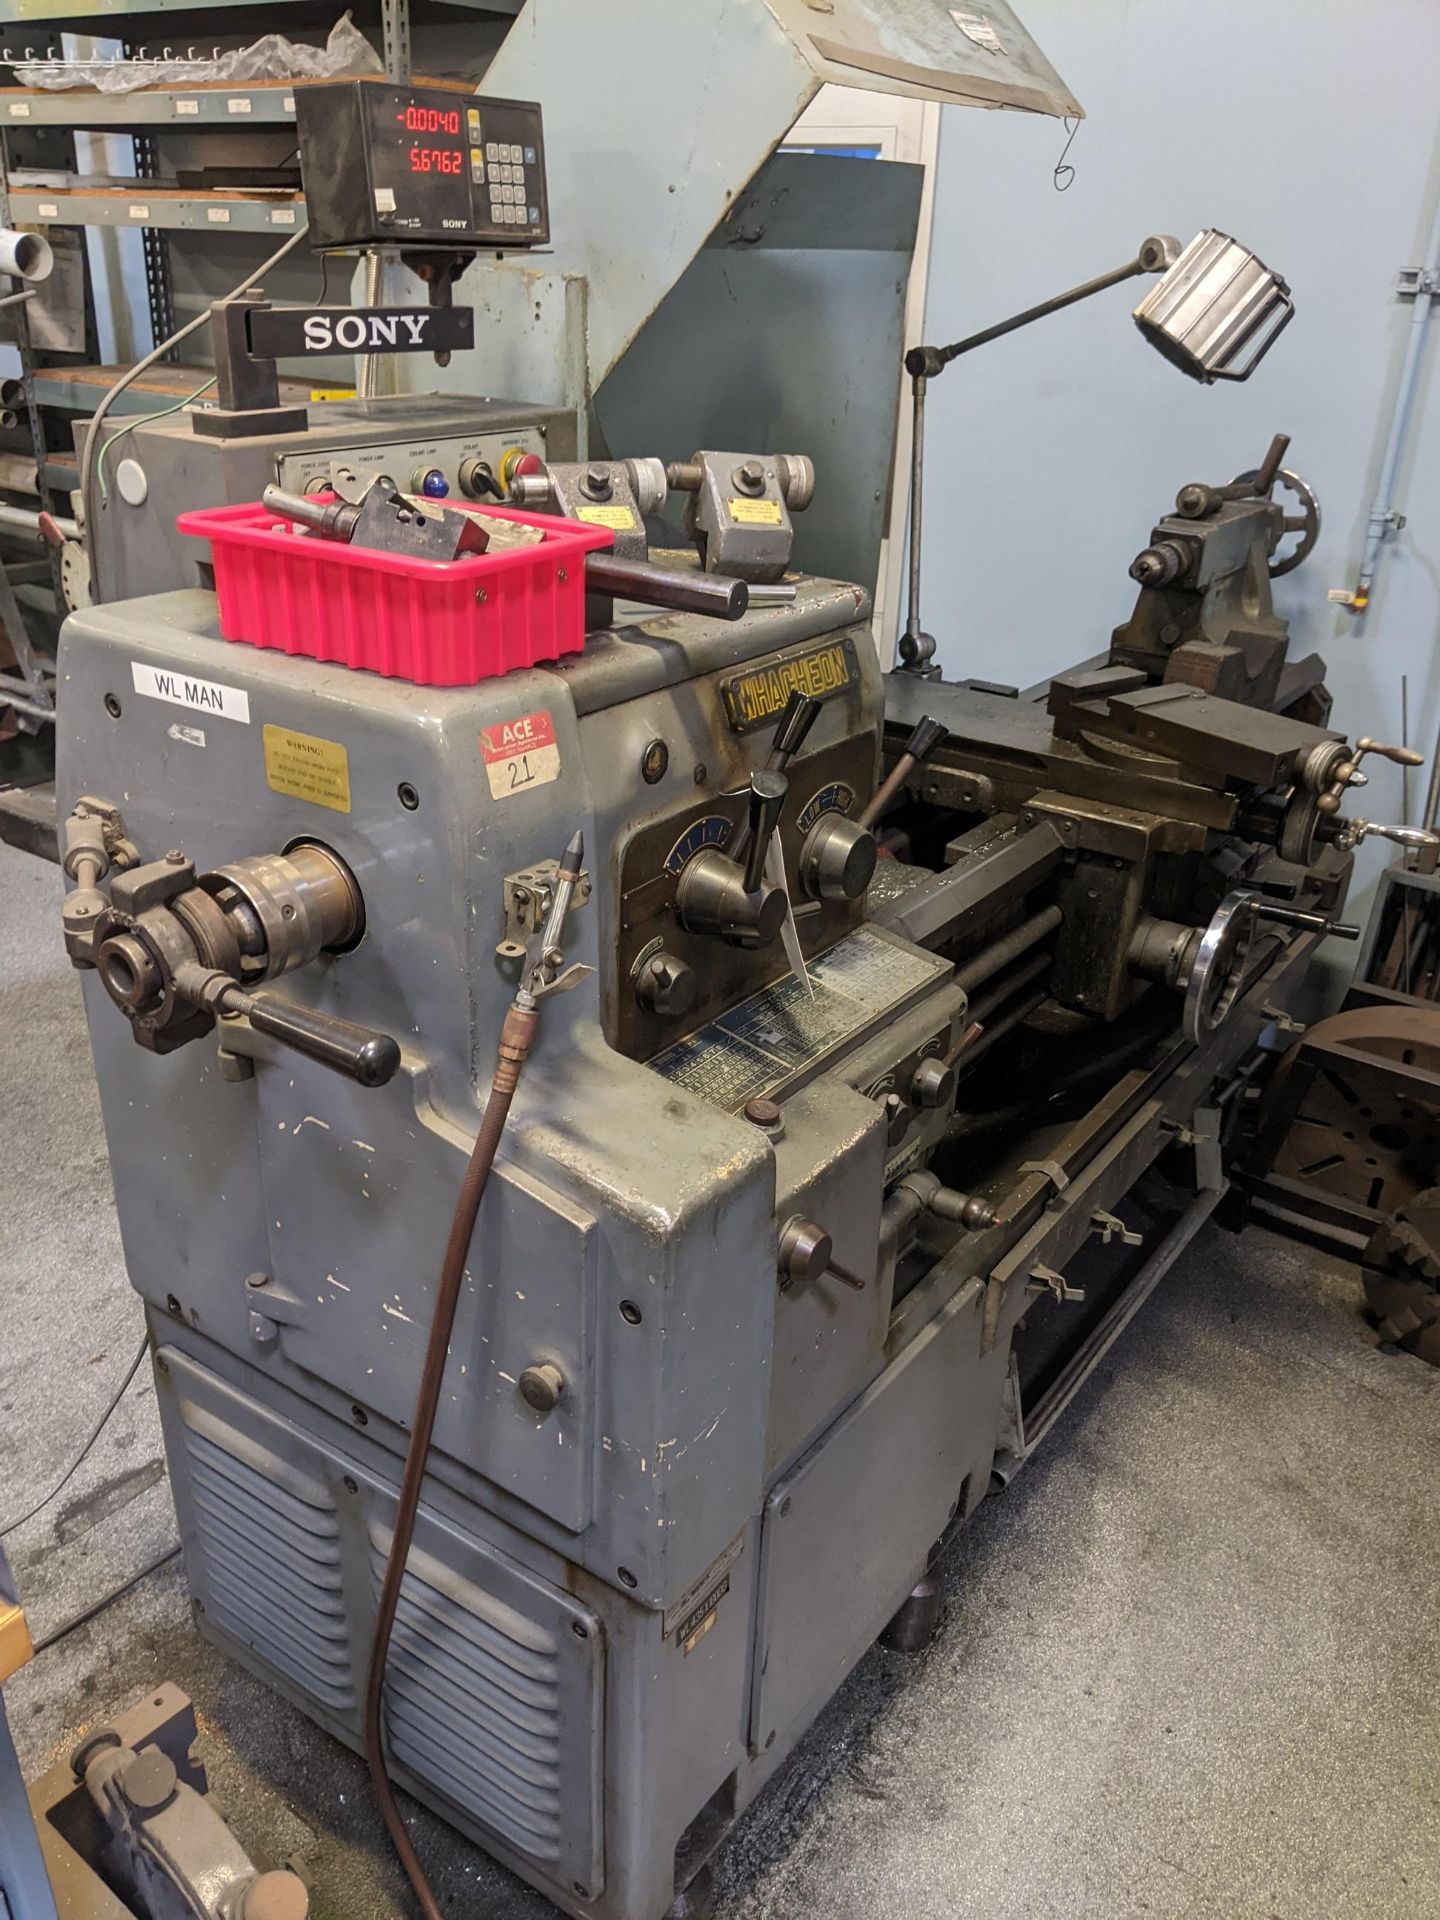 1988 WHACHEON TRADEMARK WL-435 X 1000G MACHINE LATHE WITH TAILSTOCK, S/N 8803-51 TO INCLUDE SONY - Image 13 of 15